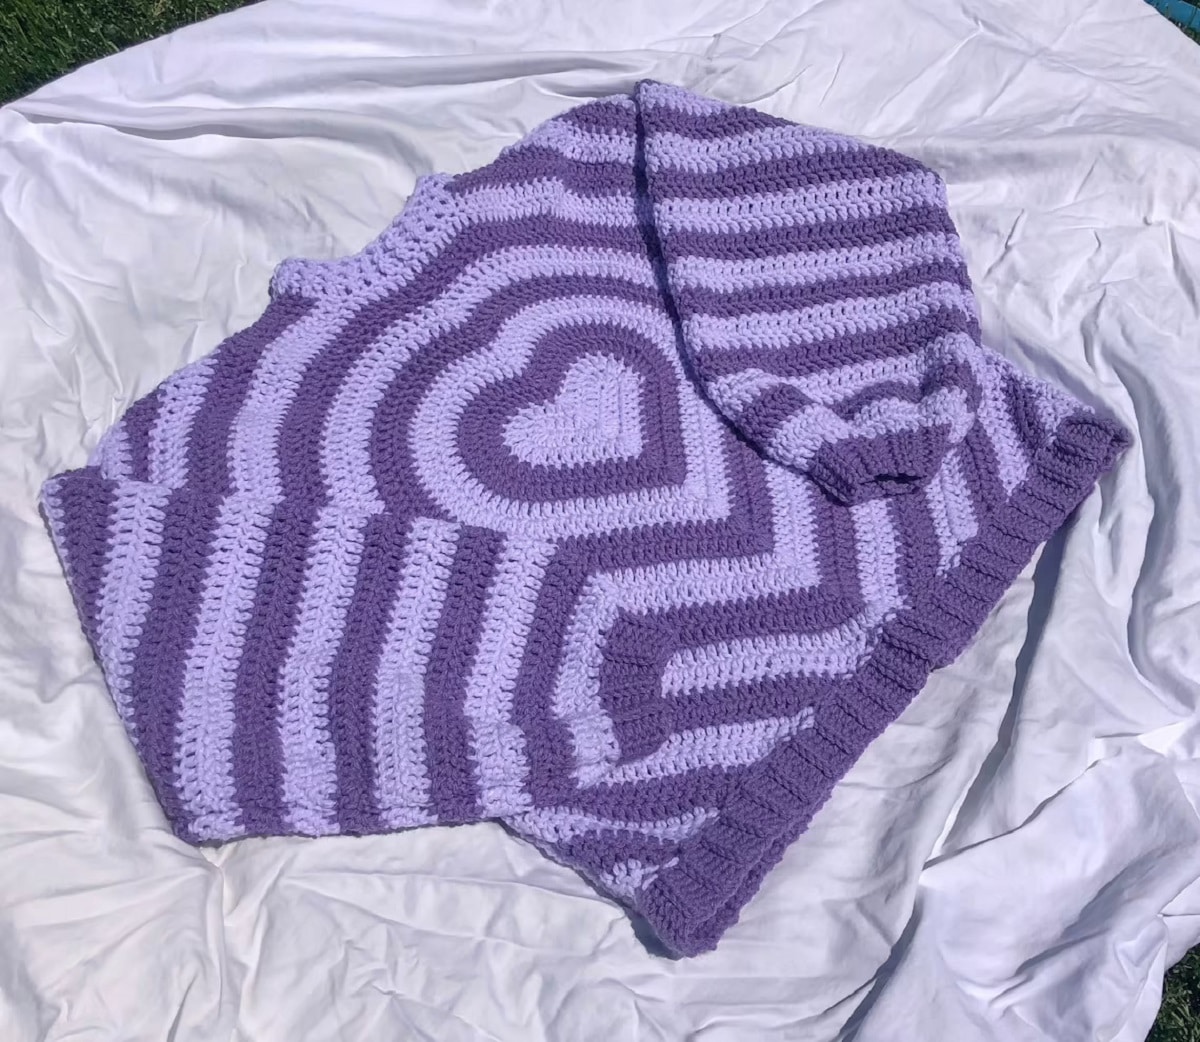 Light purple and dark purple striped crochet sweater with a purple heart in the center, long sleeves, and a round neckline.